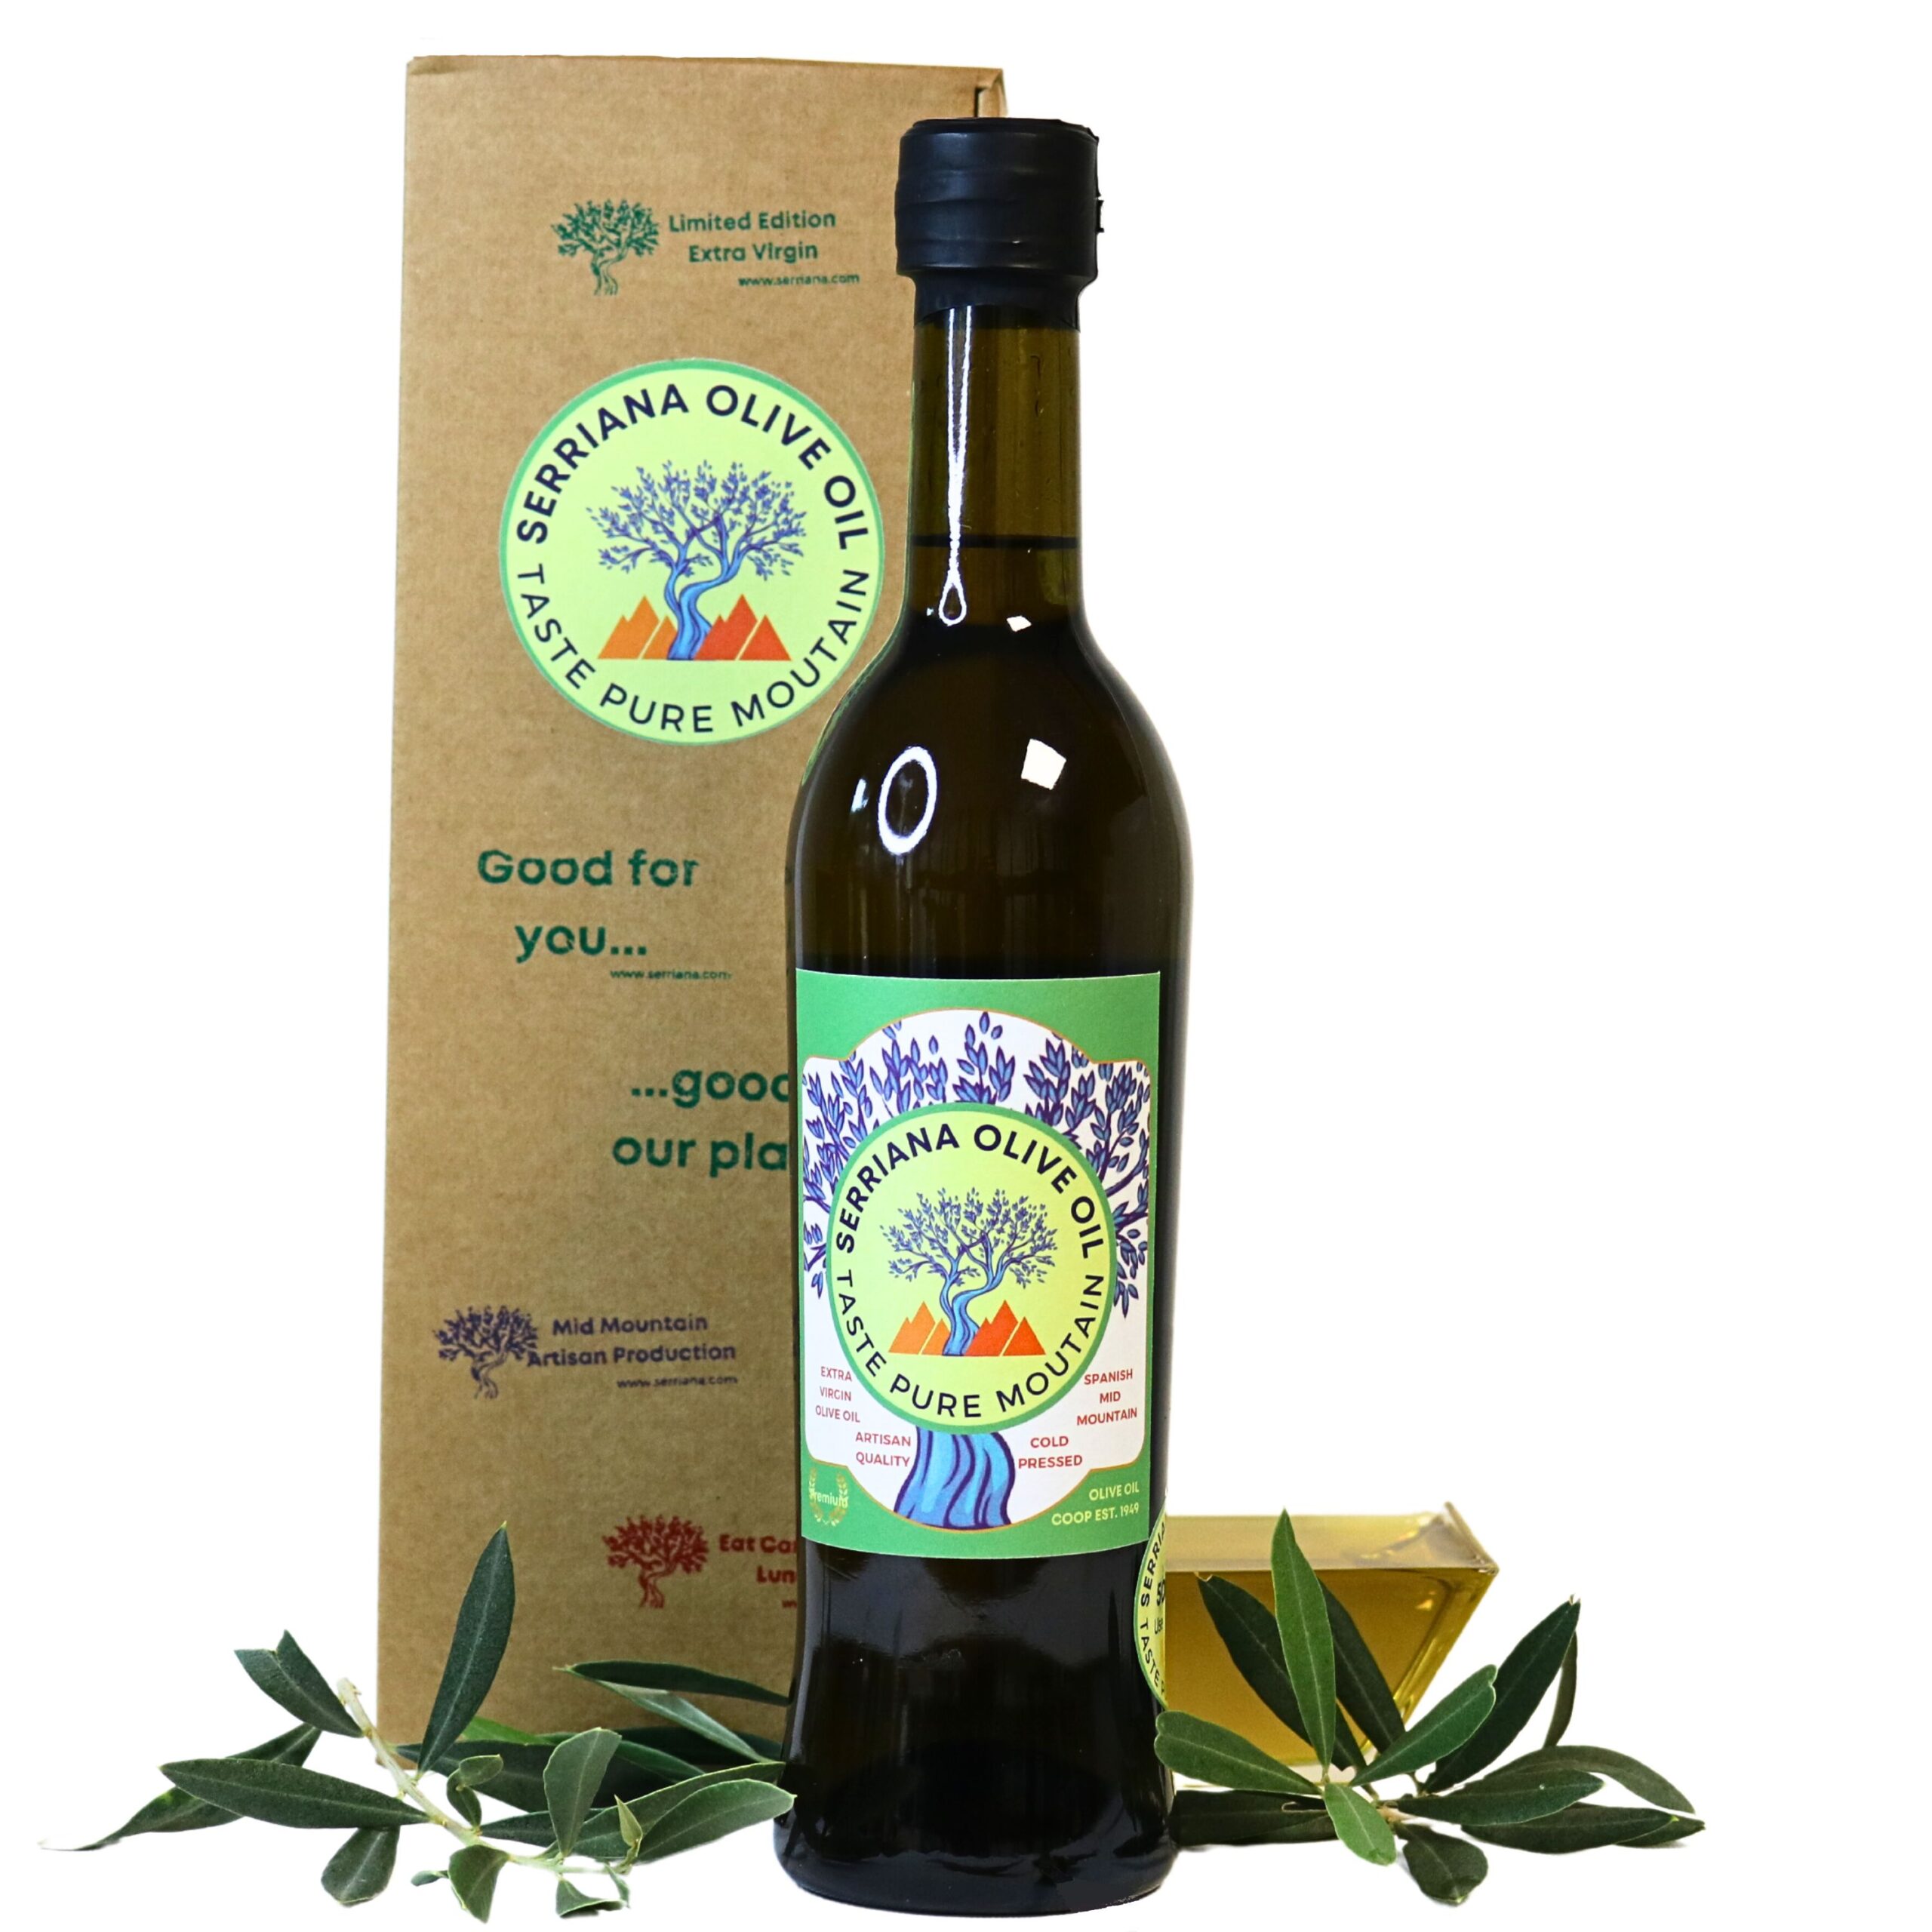 Serriana Olive Oil - 500ml glass bottle with gift box